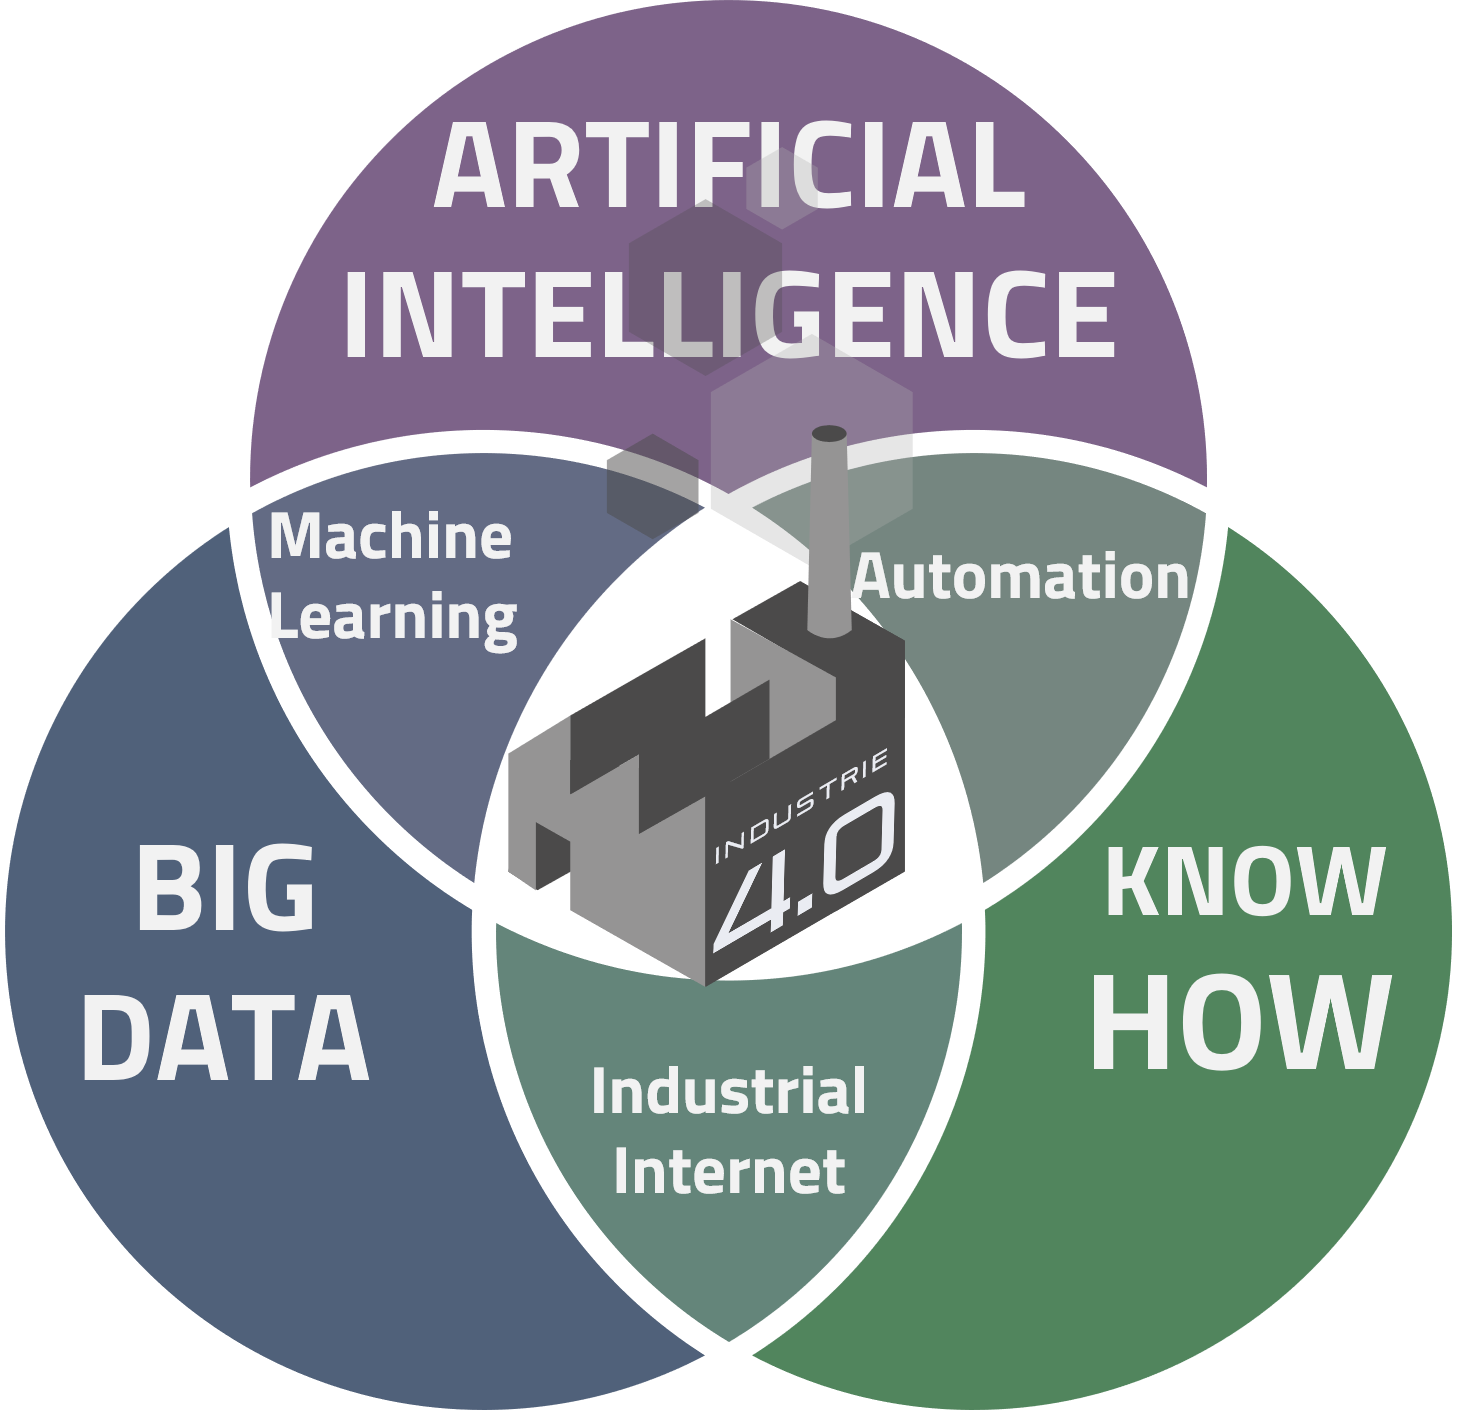 Venn Diagram: Industry 4.0 = Industrial Big Data + Artificial Intelligence + Manufacturing Know-How